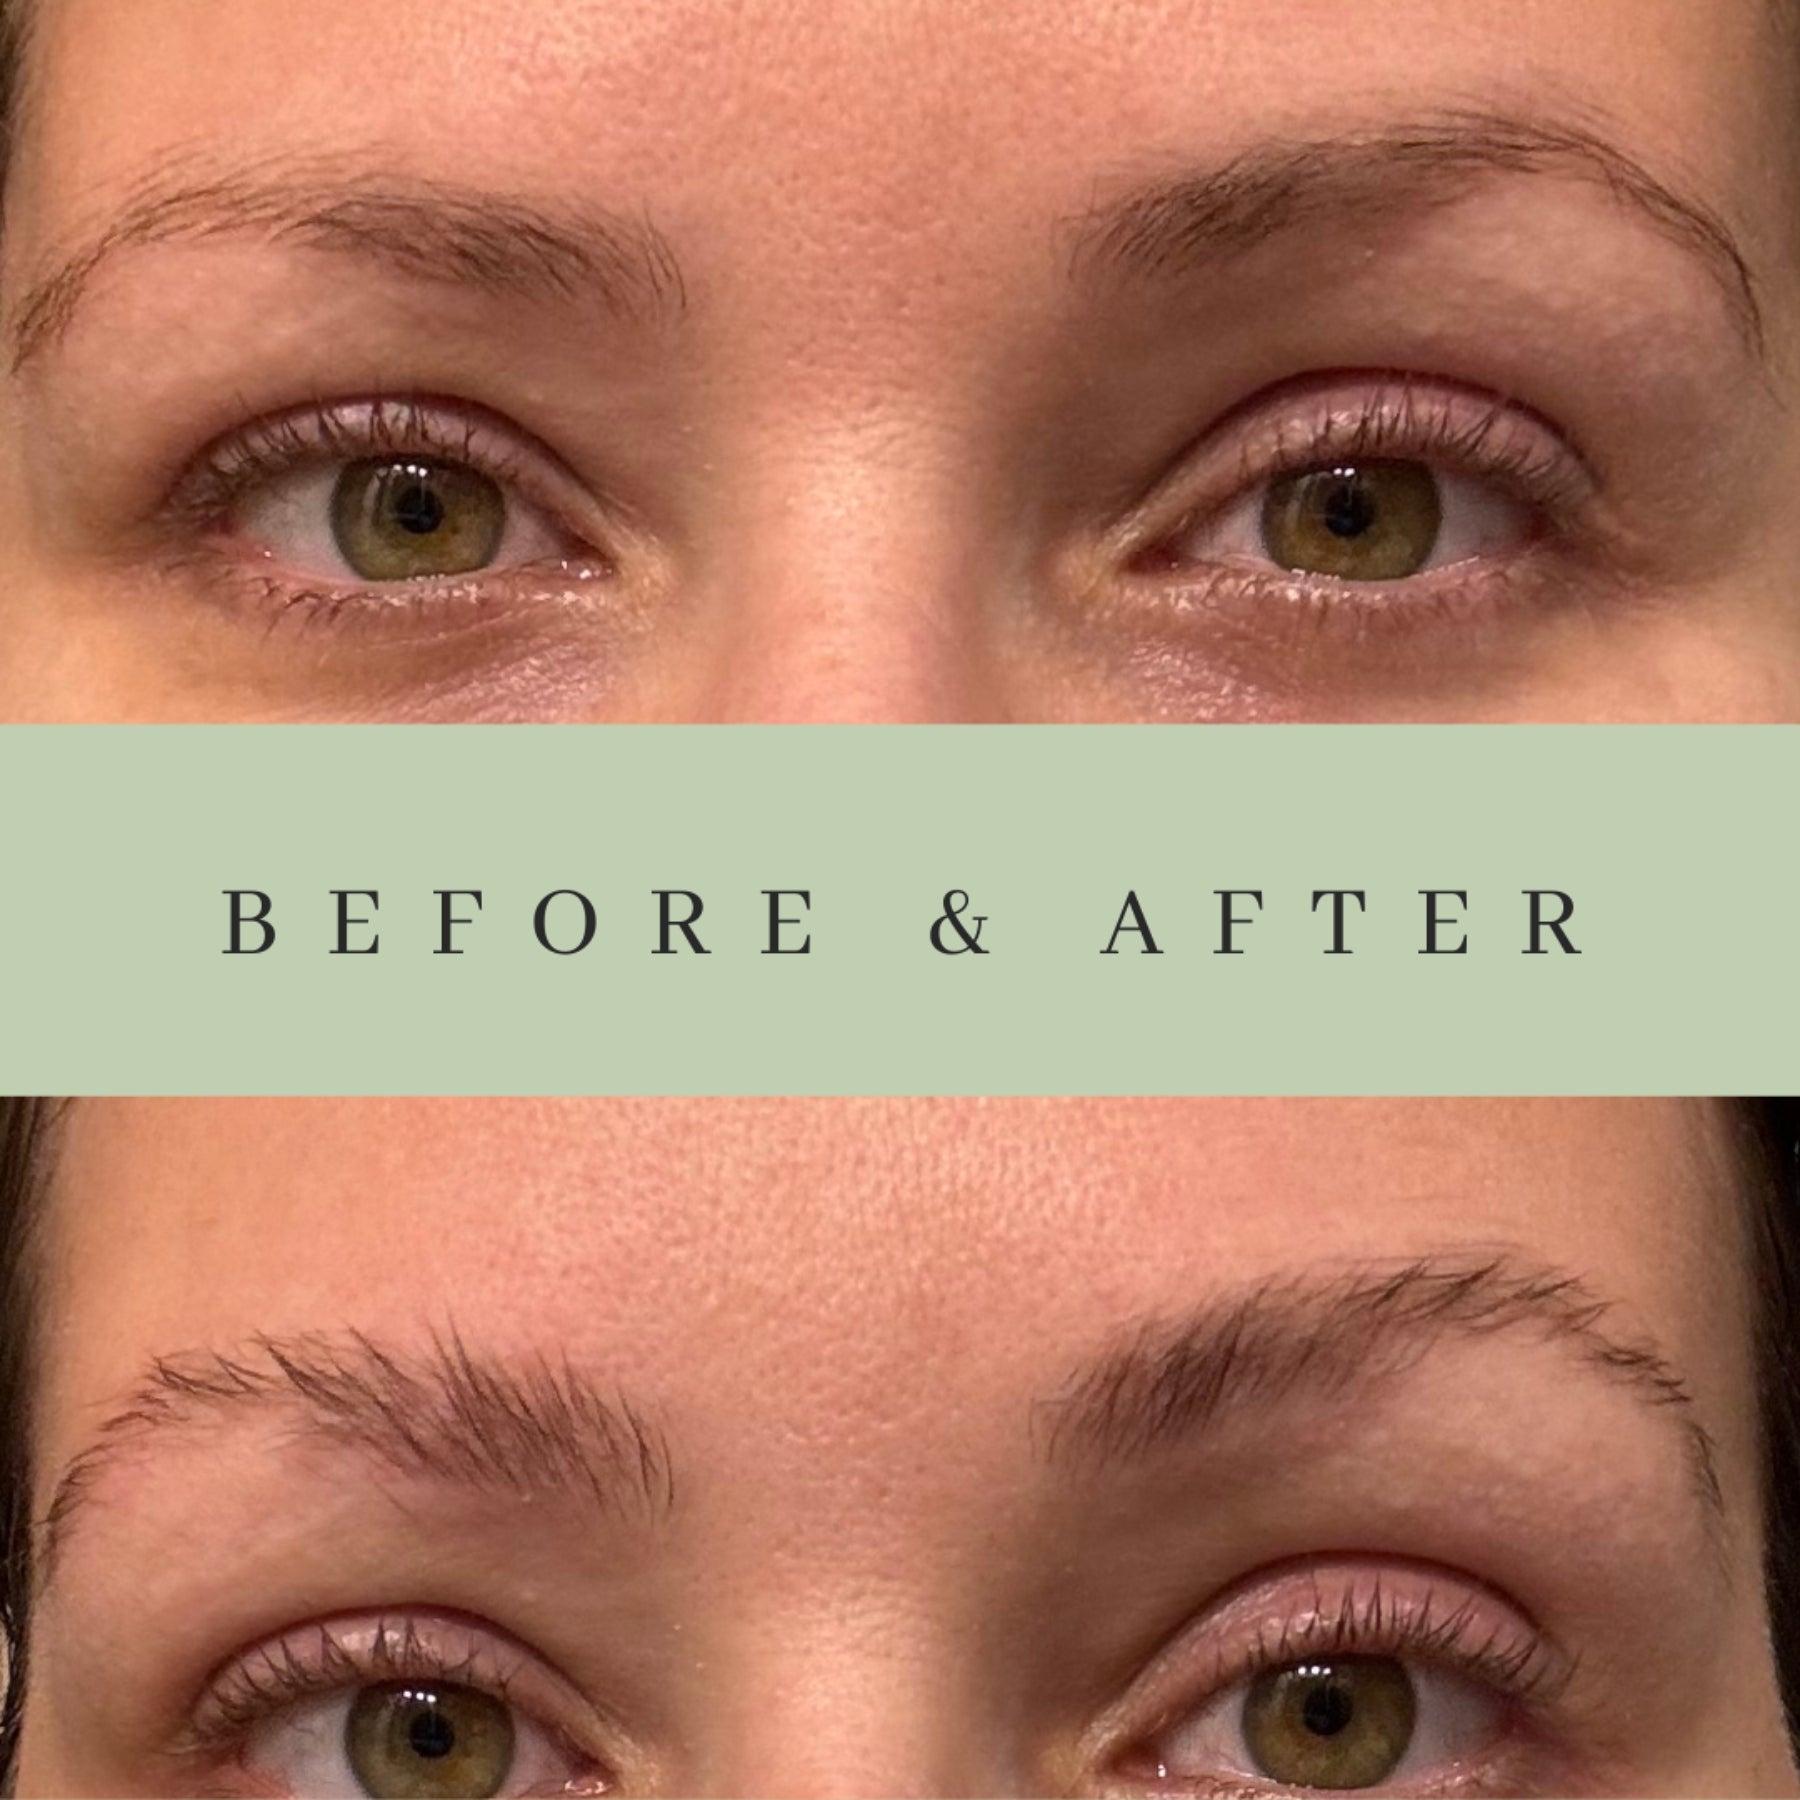 Testimonial photo of a woman's eyebrows after using the Brow Styling Wax & Clay.